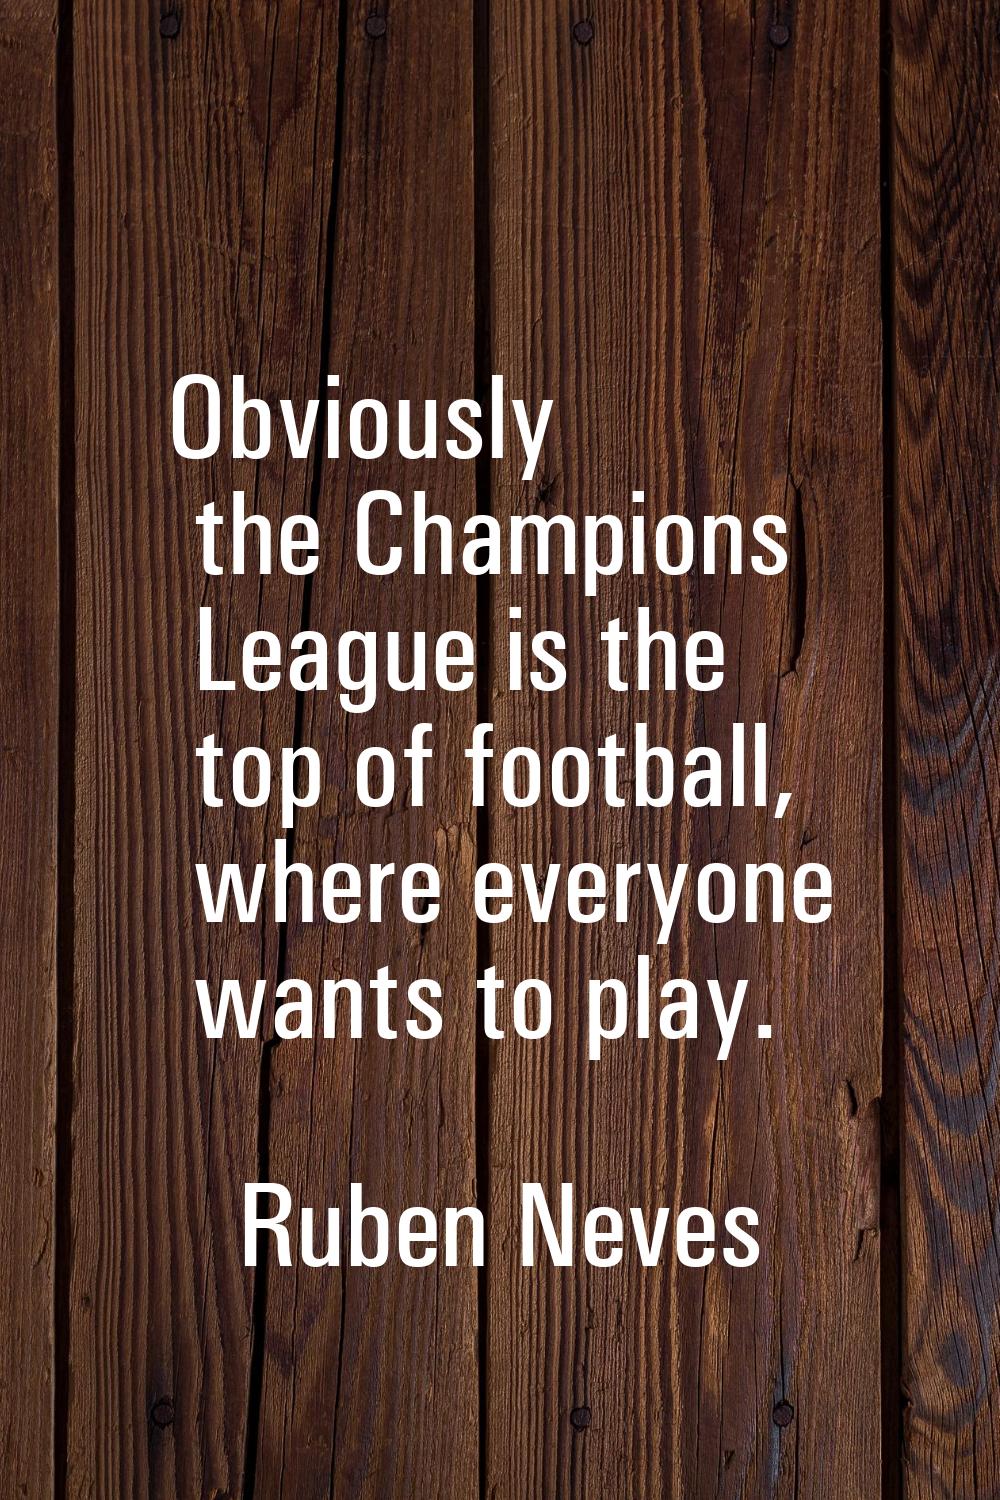 Obviously the Champions League is the top of football, where everyone wants to play.